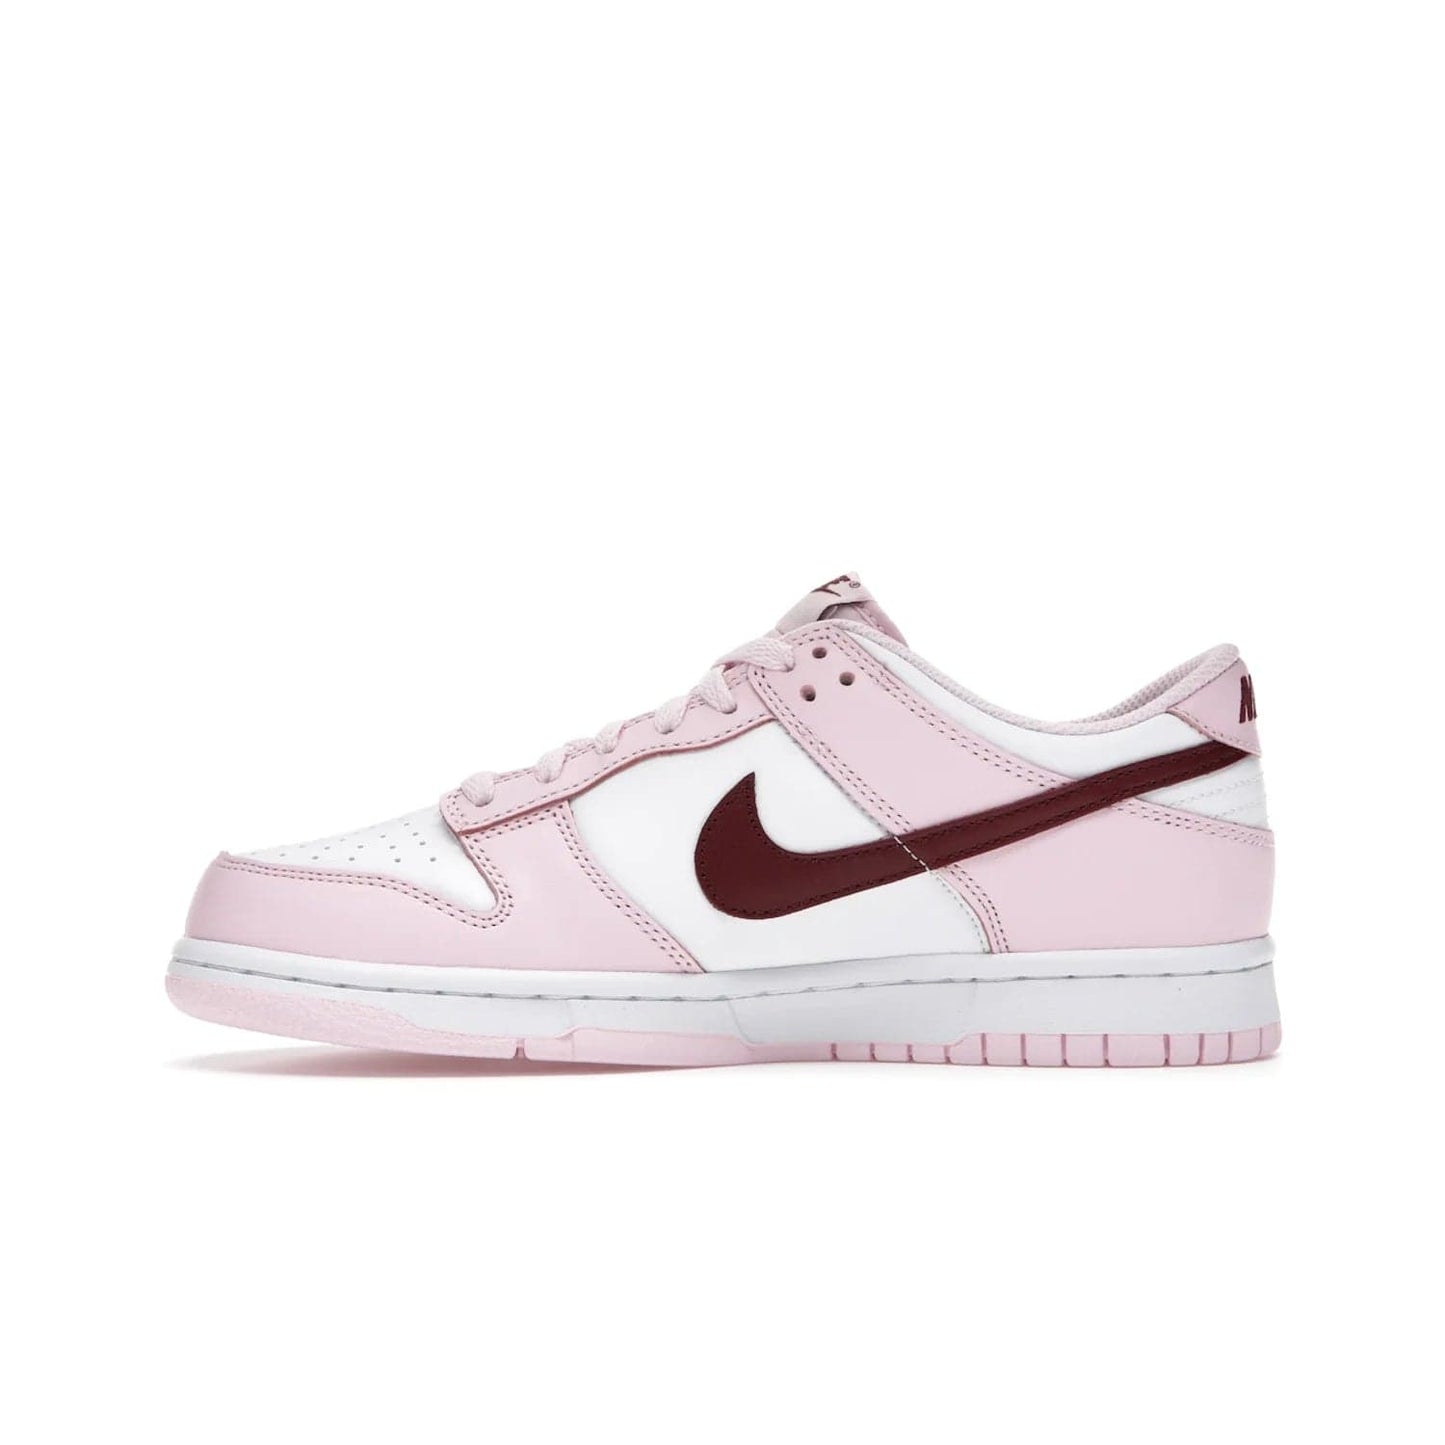 Nike Dunk Low Pink Foam Red White (GS) - Image 19 - Only at www.BallersClubKickz.com - #
Introducing the daring and stylish Nike Dunk Low Pink Foam Red White (GS) sneaker for grade schoolers. White leather with pink overlays and Dark Beetroot accents, classic Nike Dunk midsole and pink outsole. Released August 2021 for $85.